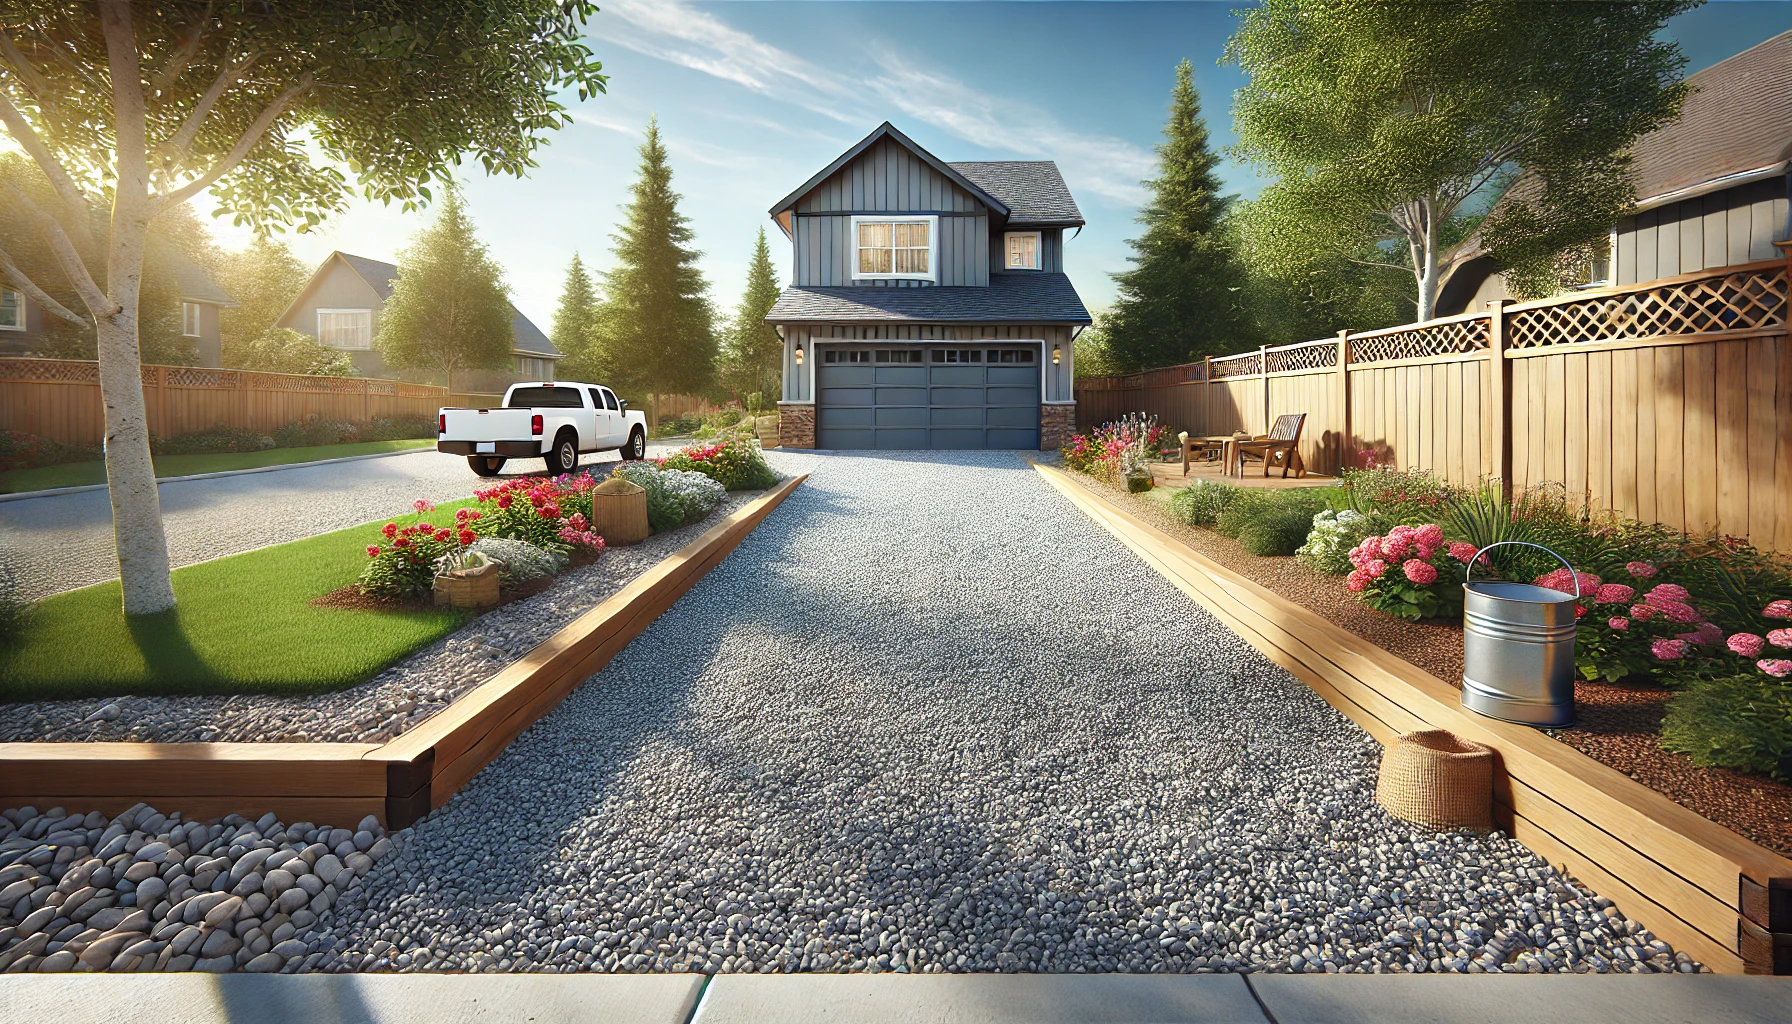 Sunlit suburban home with landscaped driveway and garden.